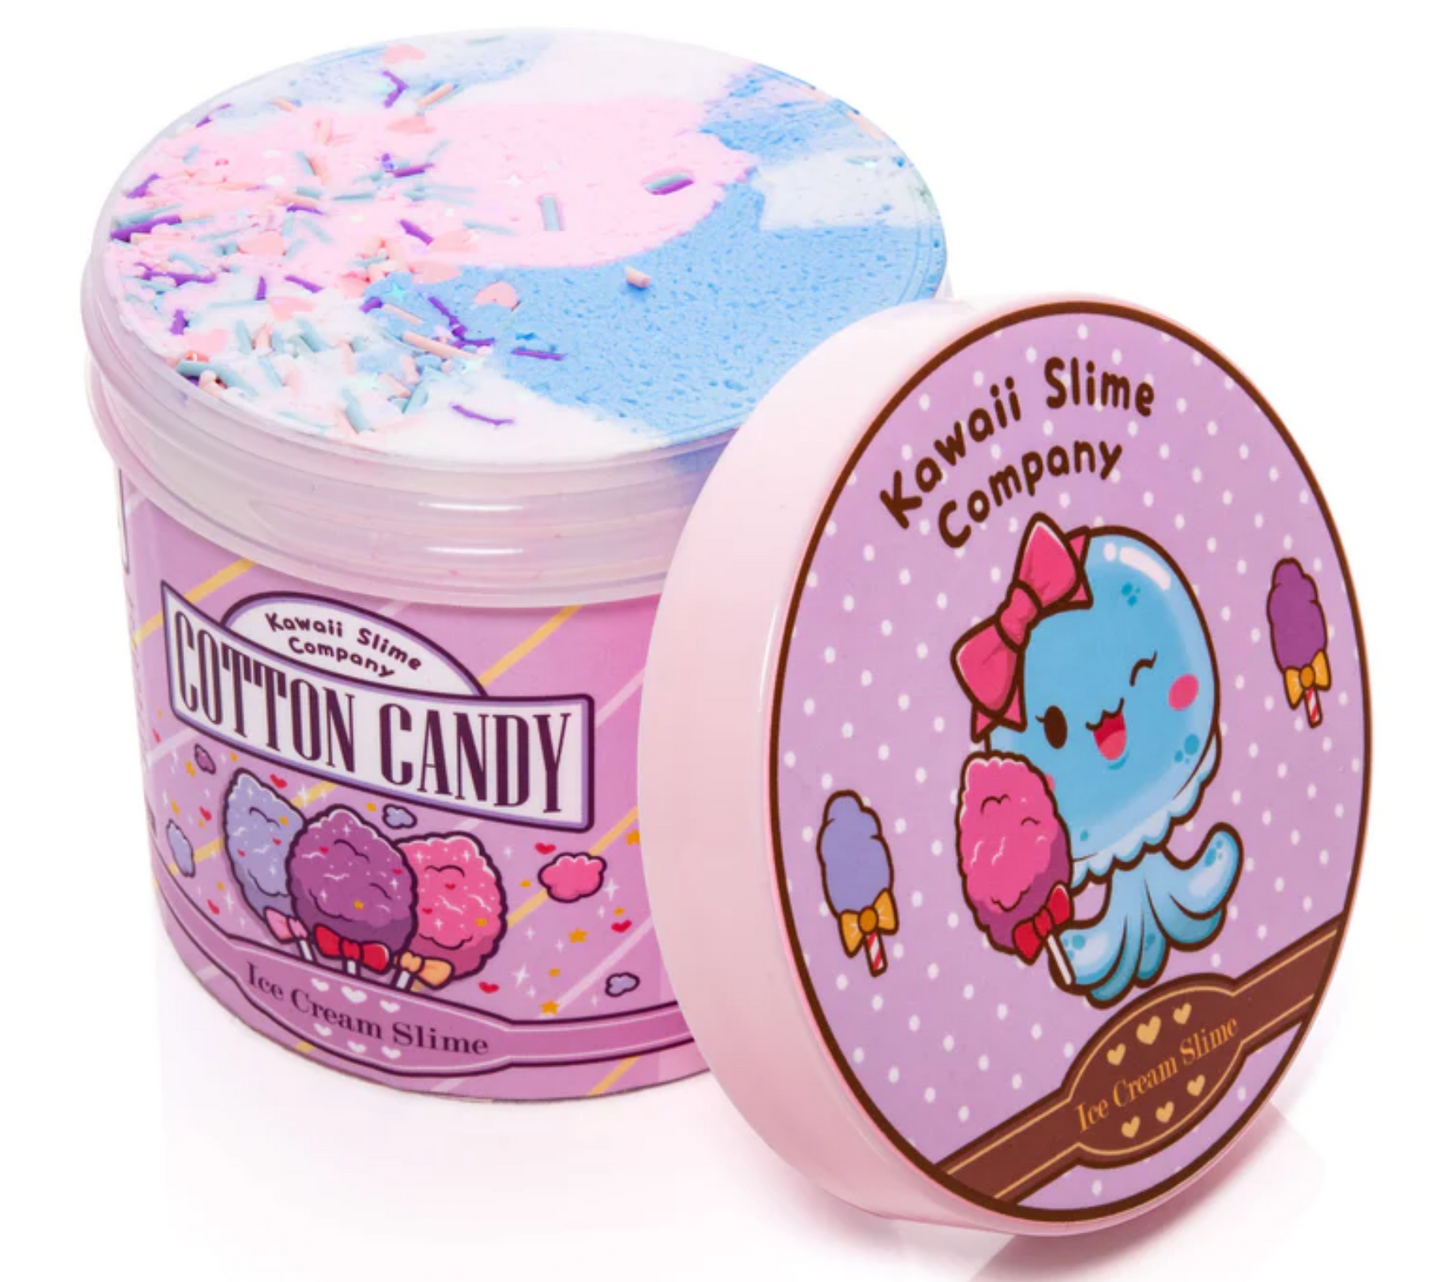 Slime - Cotton Candy Scented Ice Cream Pint